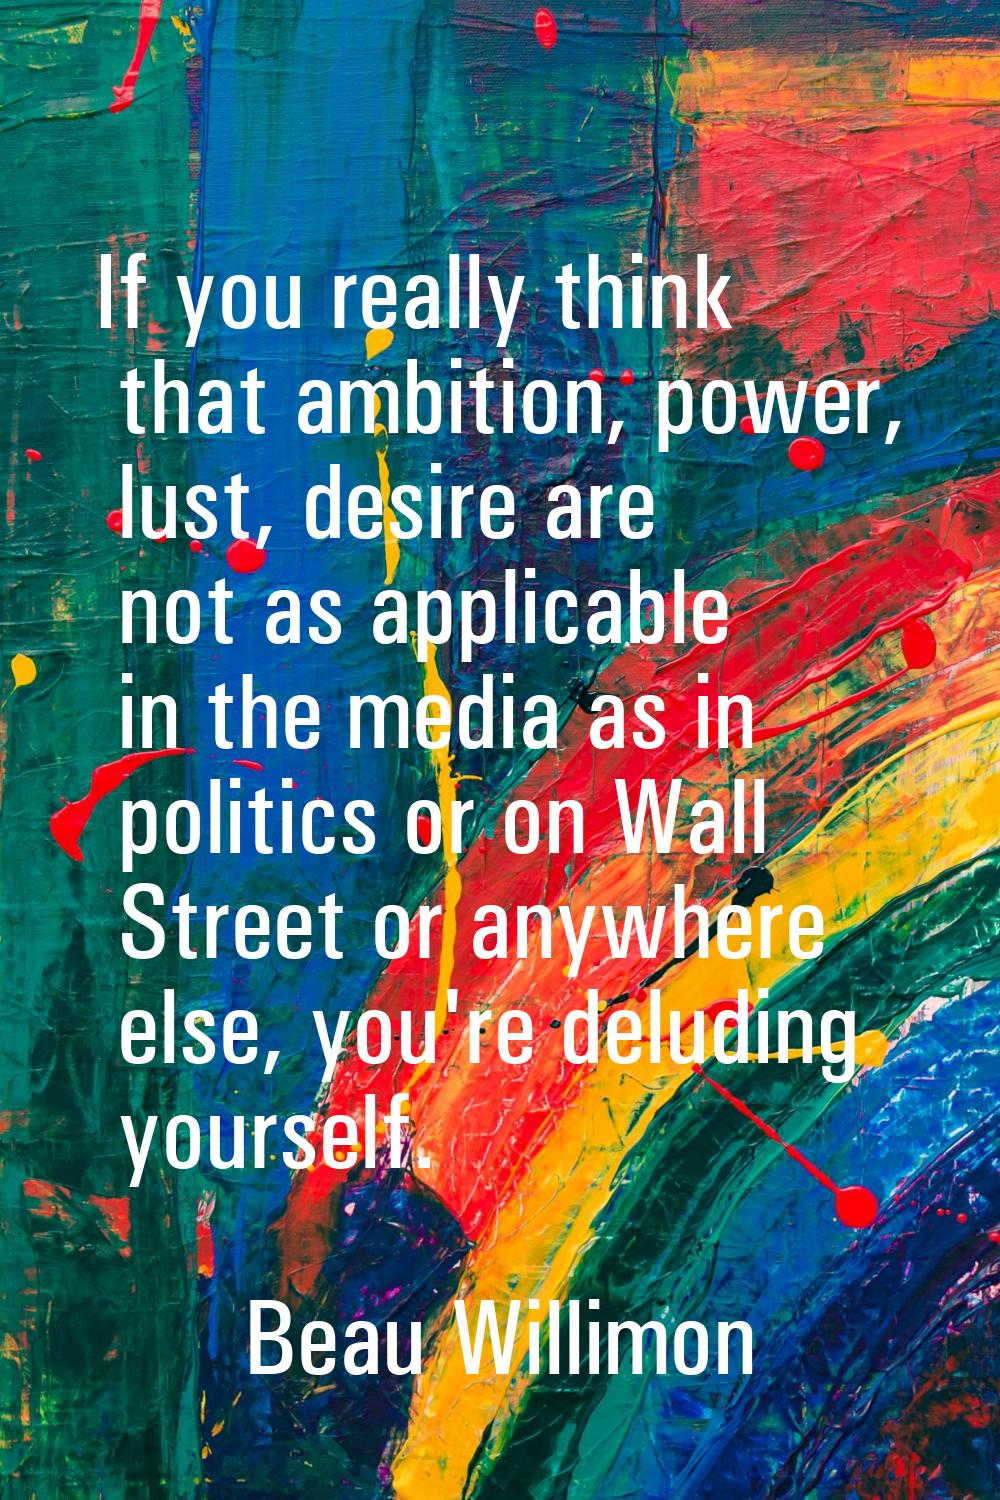 If you really think that ambition, power, lust, desire are not as applicable in the media as in pol